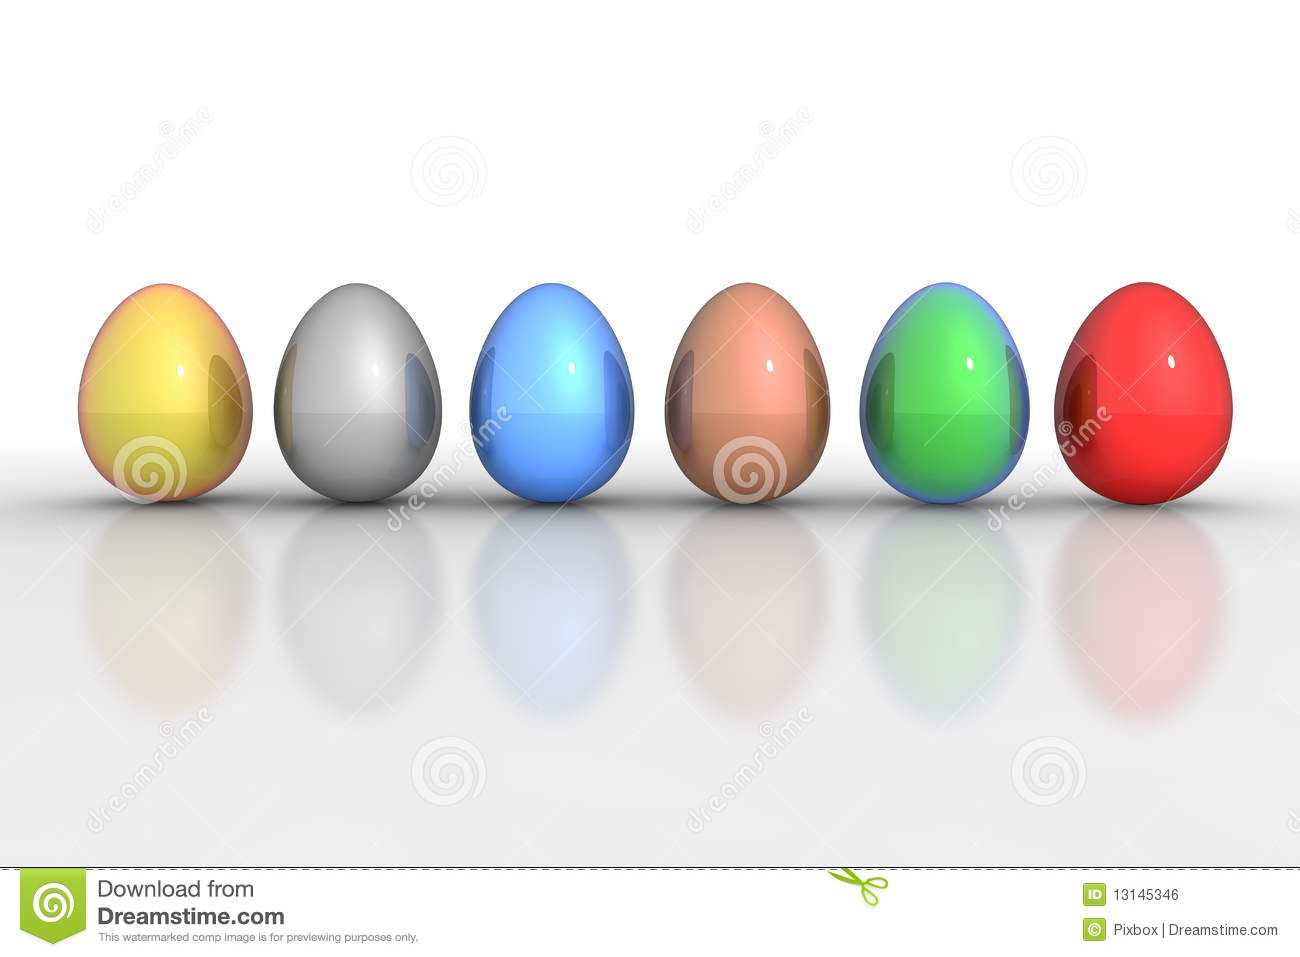 Six Metallic Eggs In A Line   Colourful Mix Royalty Free Stock Image